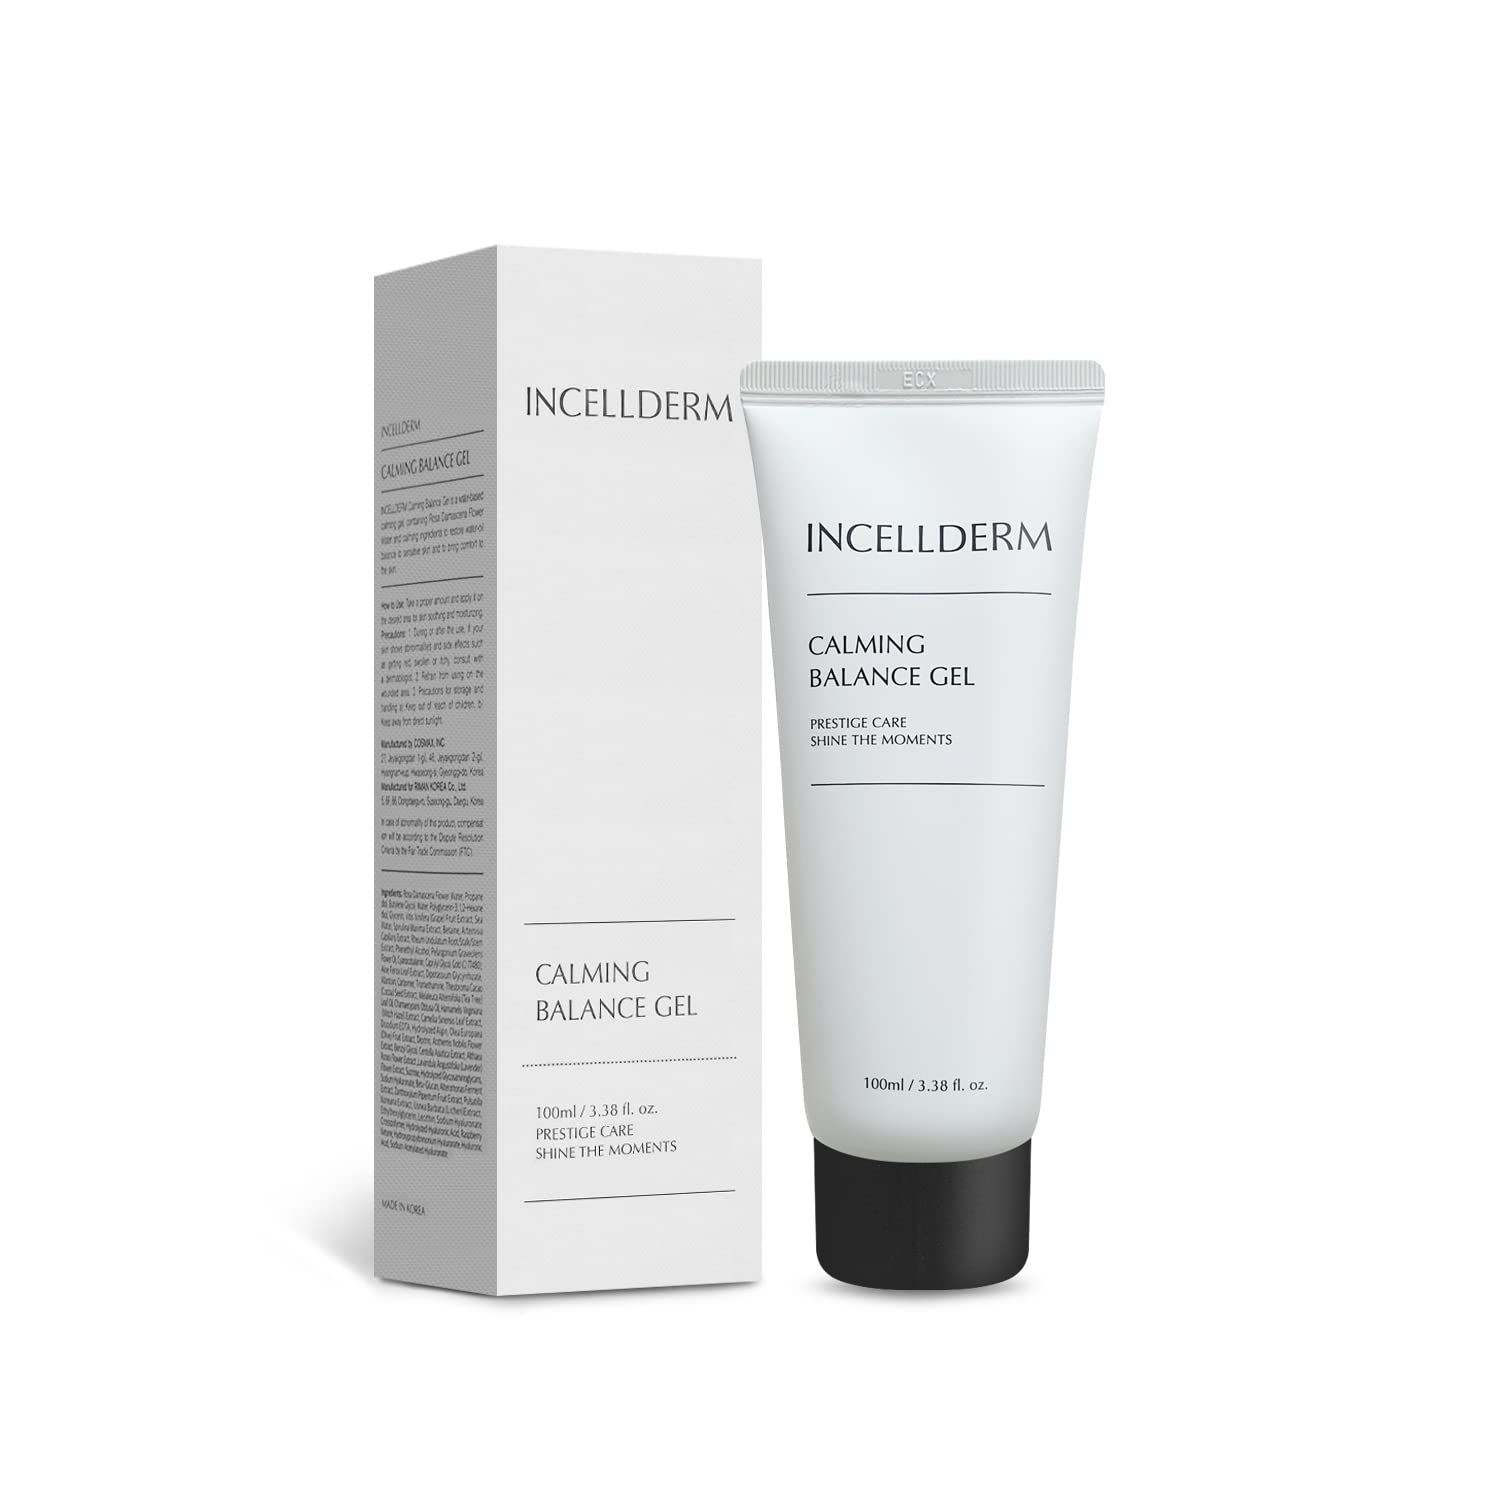 A 100ml bottle of INCELLDERM Calming Balance Gel, designed to soothe and balance the skin.